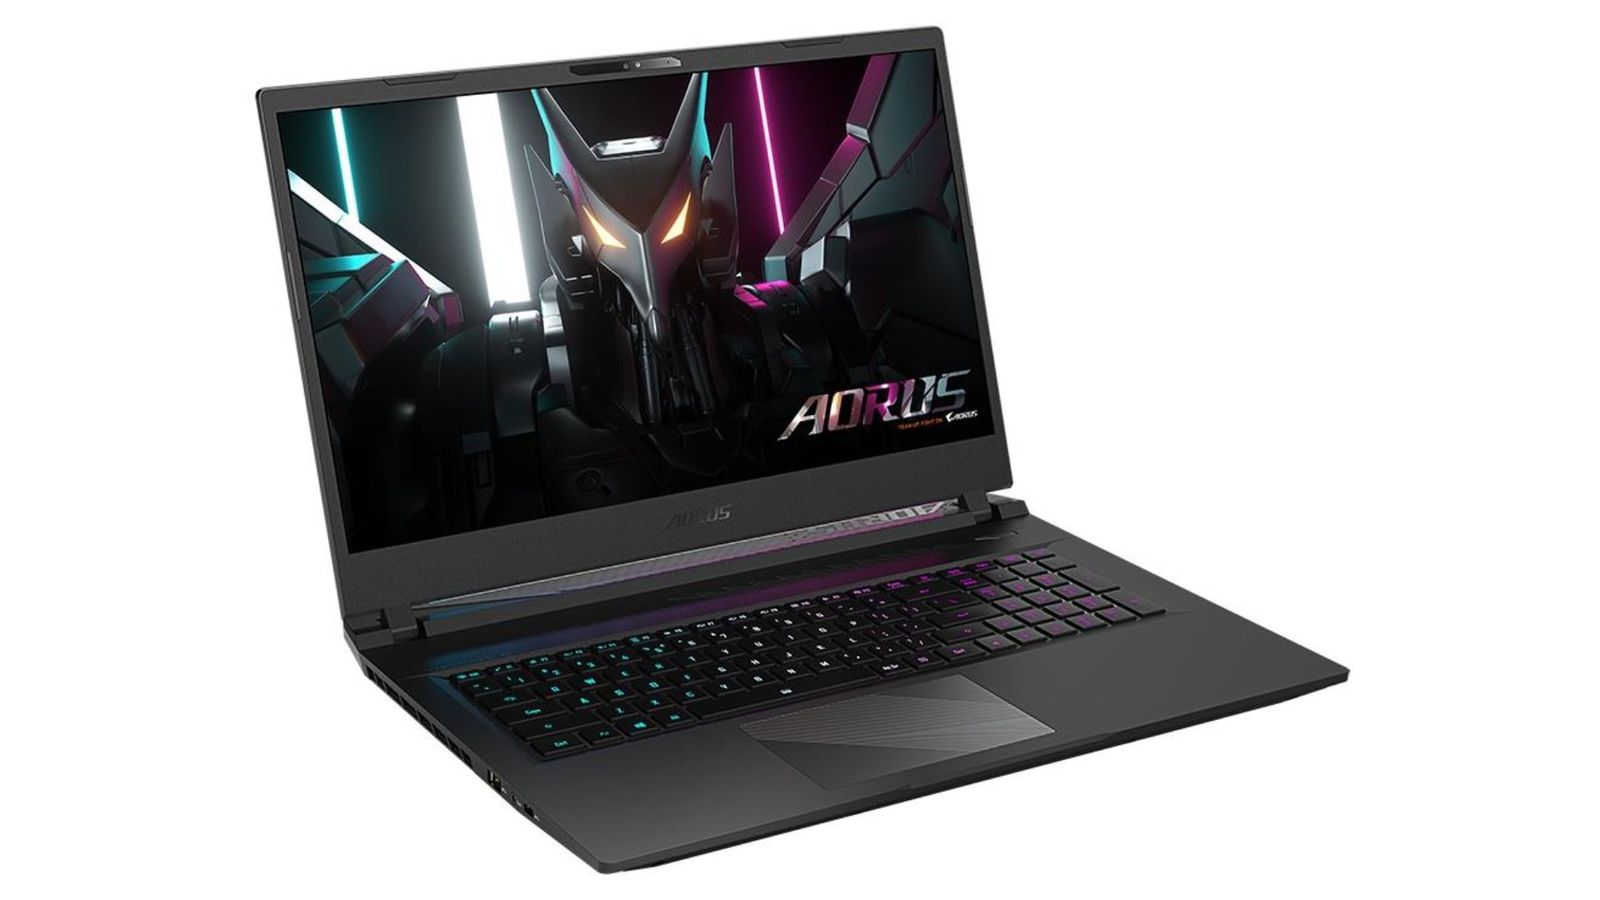 Gigabyte AORUS 17 product image of a black laptop with pink and blue backlit keys and a mechanical animal-shaped robot on the background of its display.